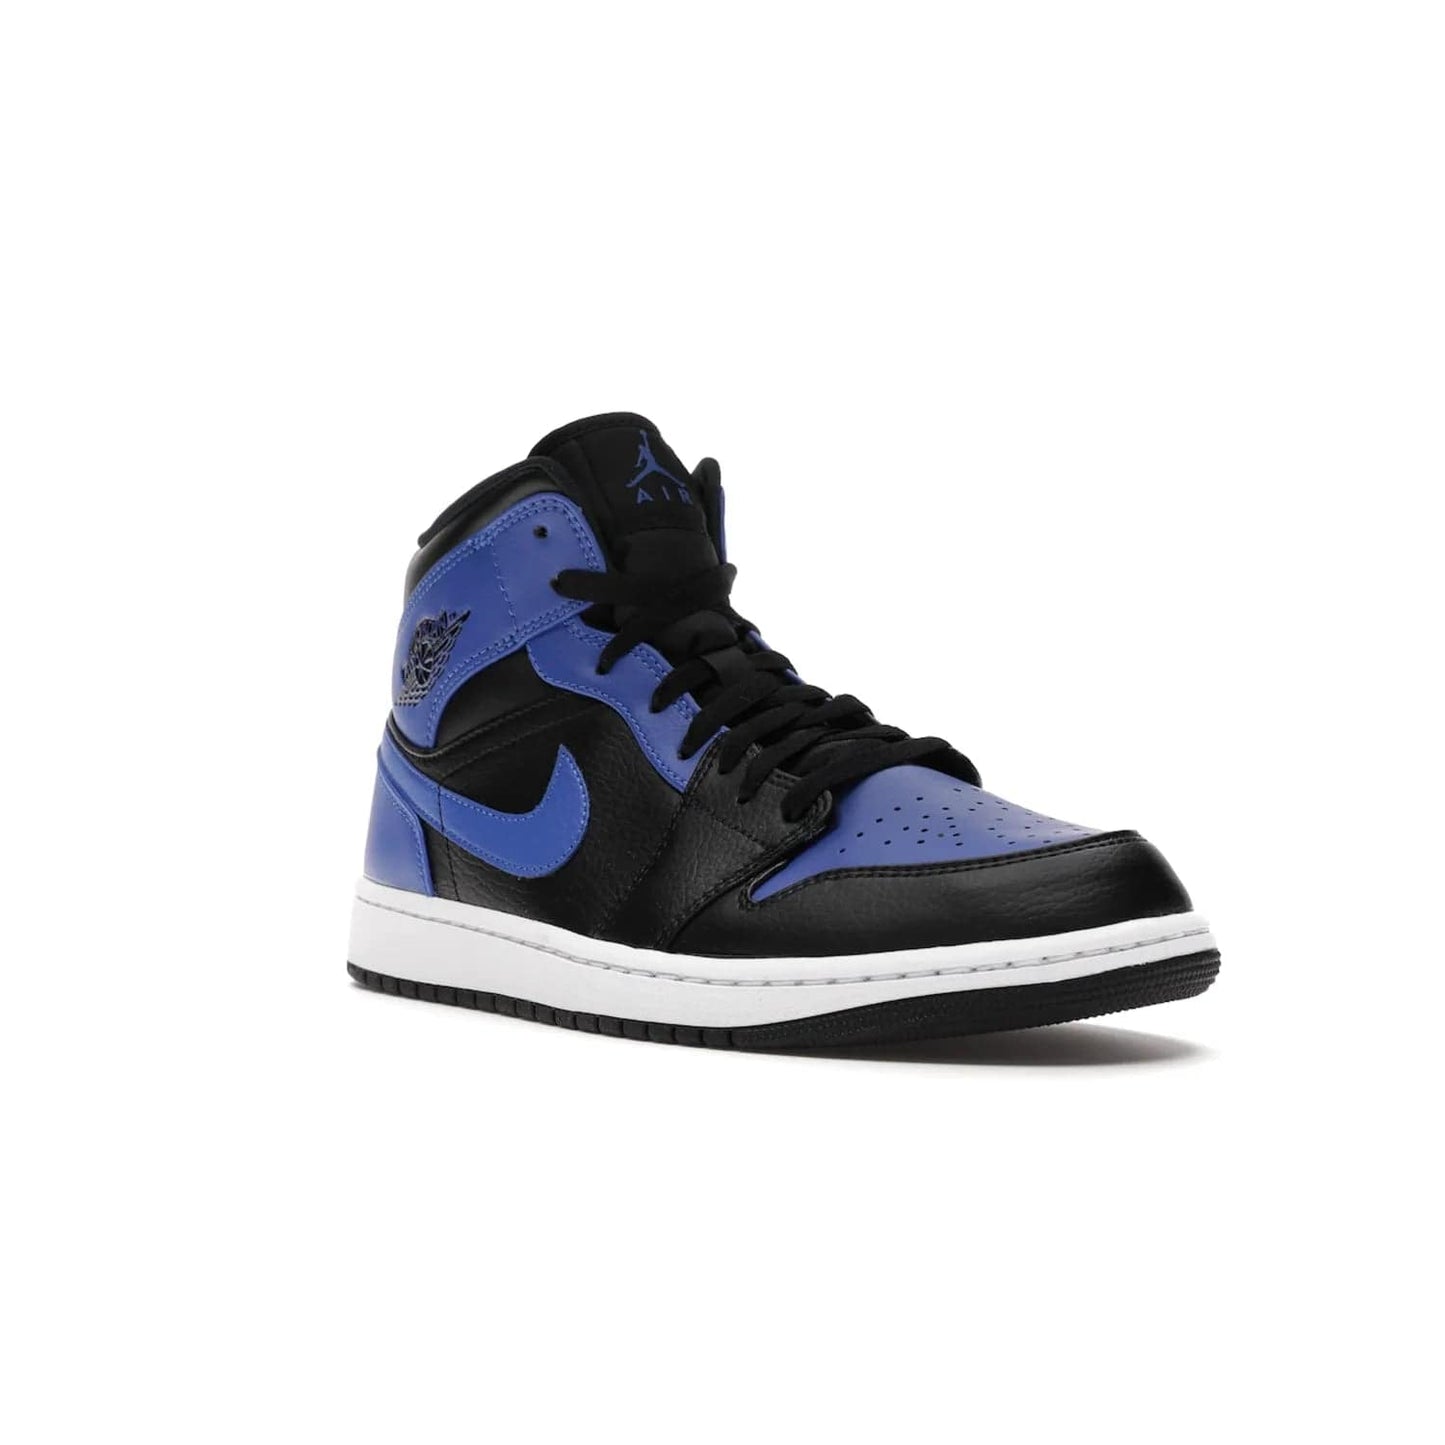 Jordan 1 Mid Hyper Royal Tumbled Leather - Image 6 - Only at www.BallersClubKickz.com - Iconic colorway of the Air Jordan 1 Mid Black Royal Tumbled Leather. Features a black tumbled leather upper, royal blue leather overlays, white midsole & black rubber outsole. Released December 2020. Adds premium style to any collection.